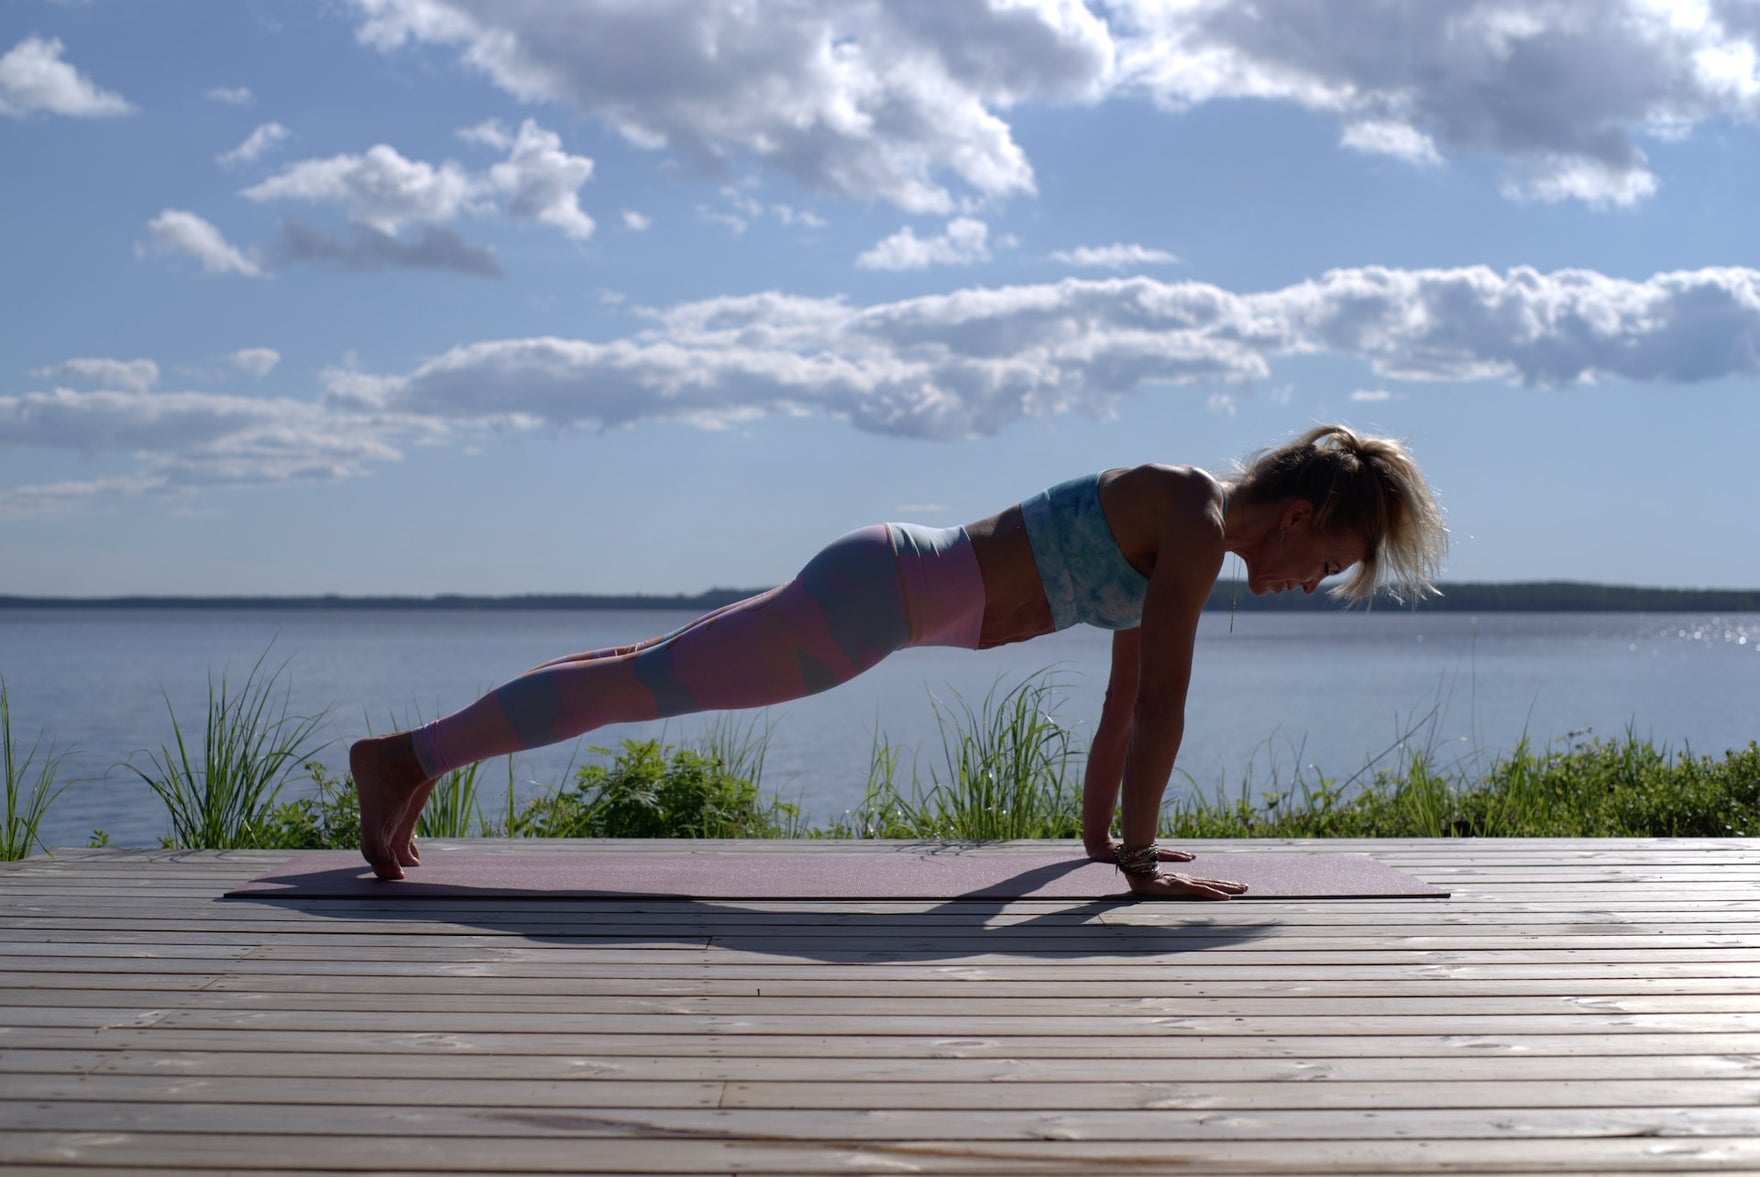 A woman does a plank on a wooden dock in front of a lake and a blue sky